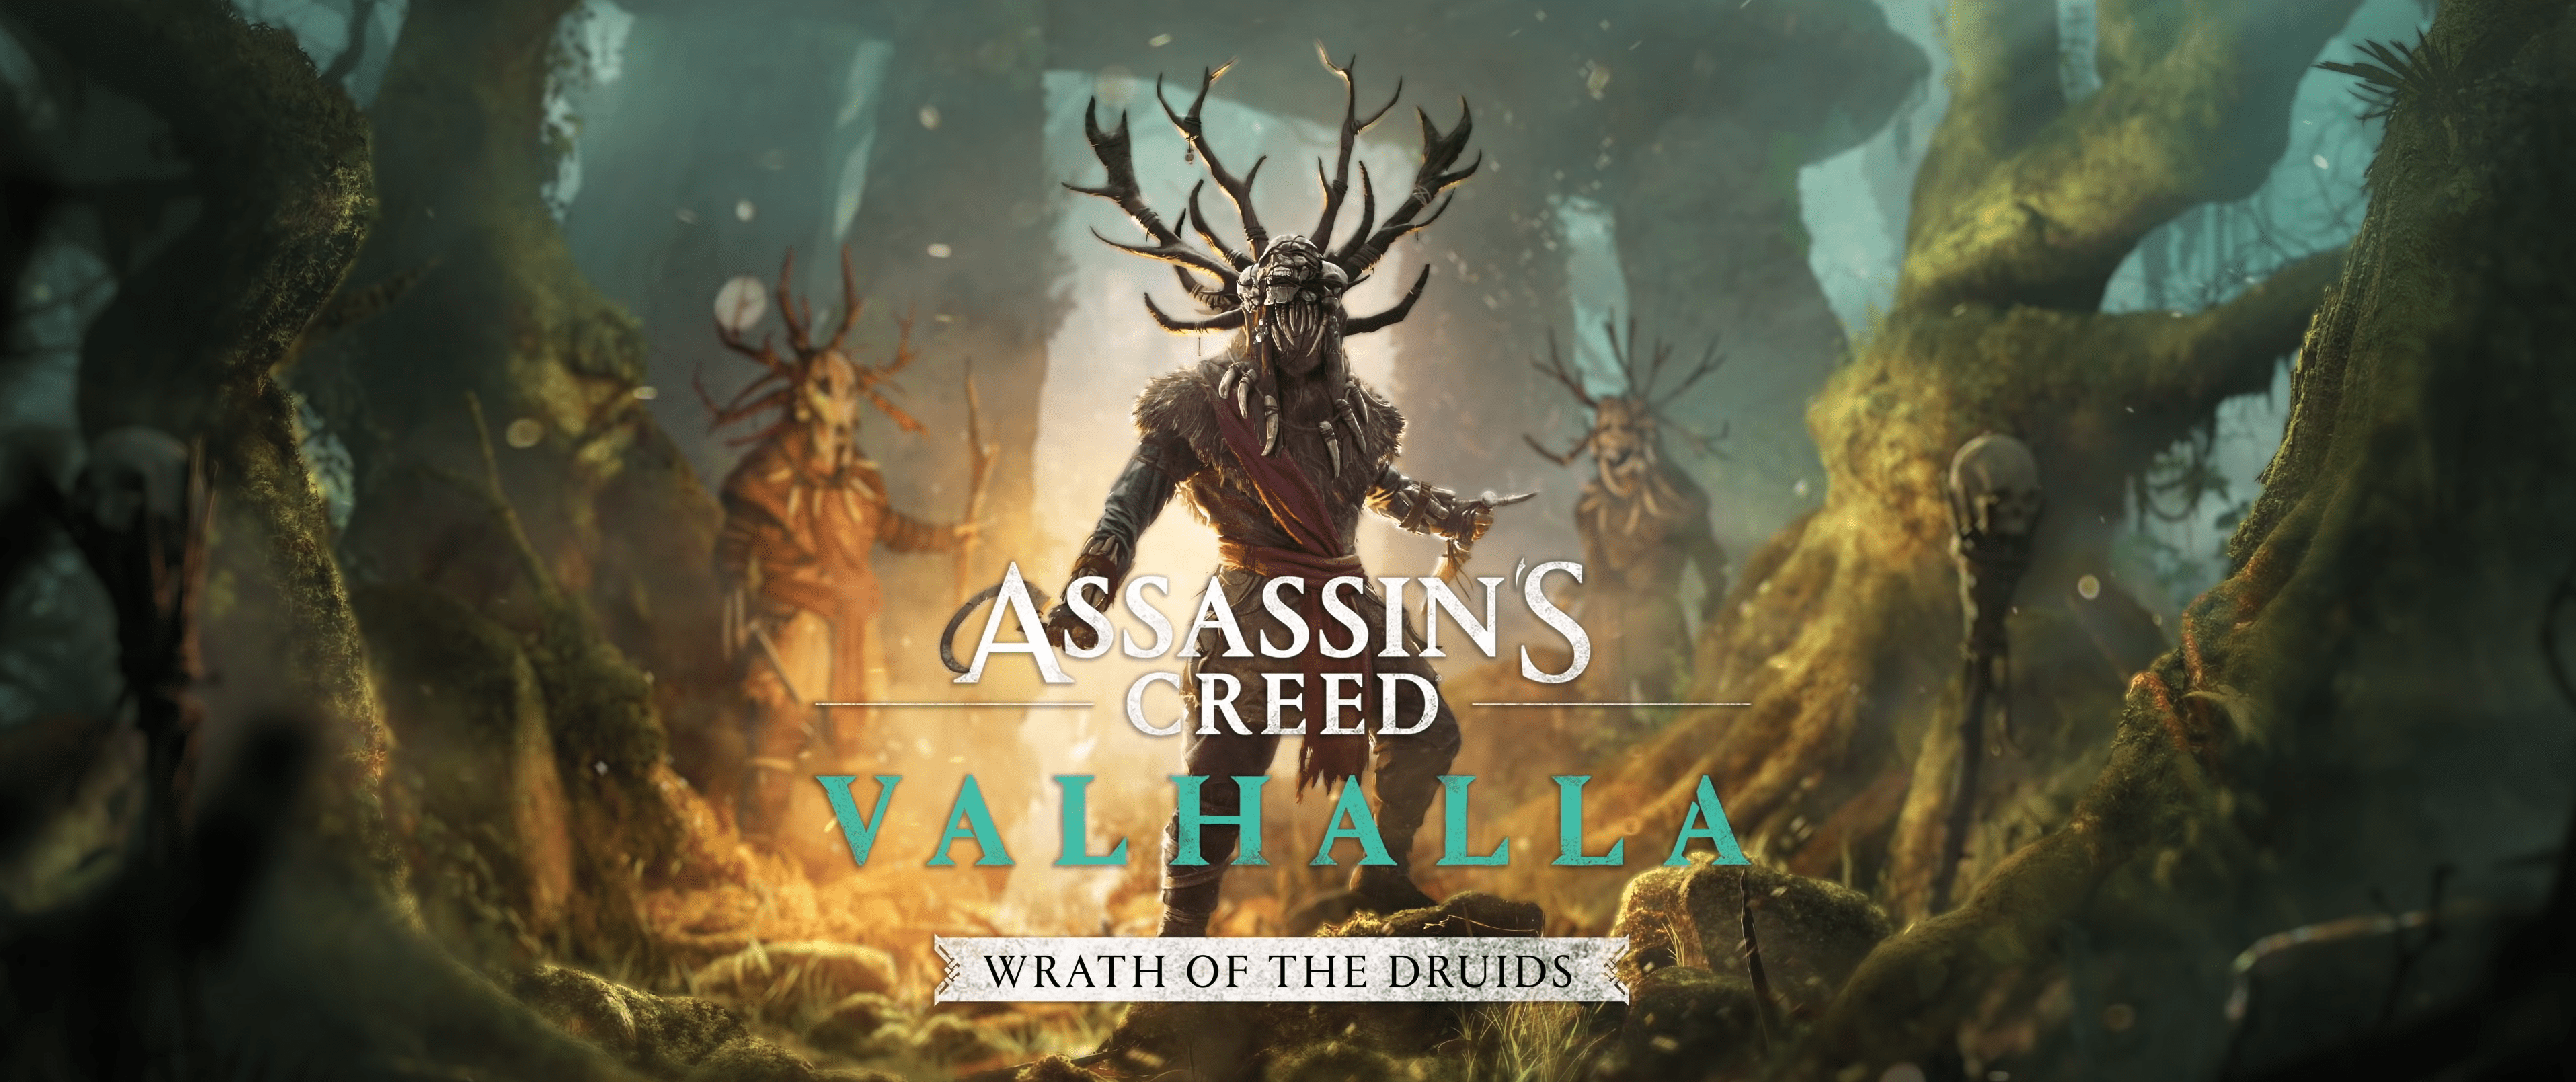 Assassin's Creed Valhalla Post Launch